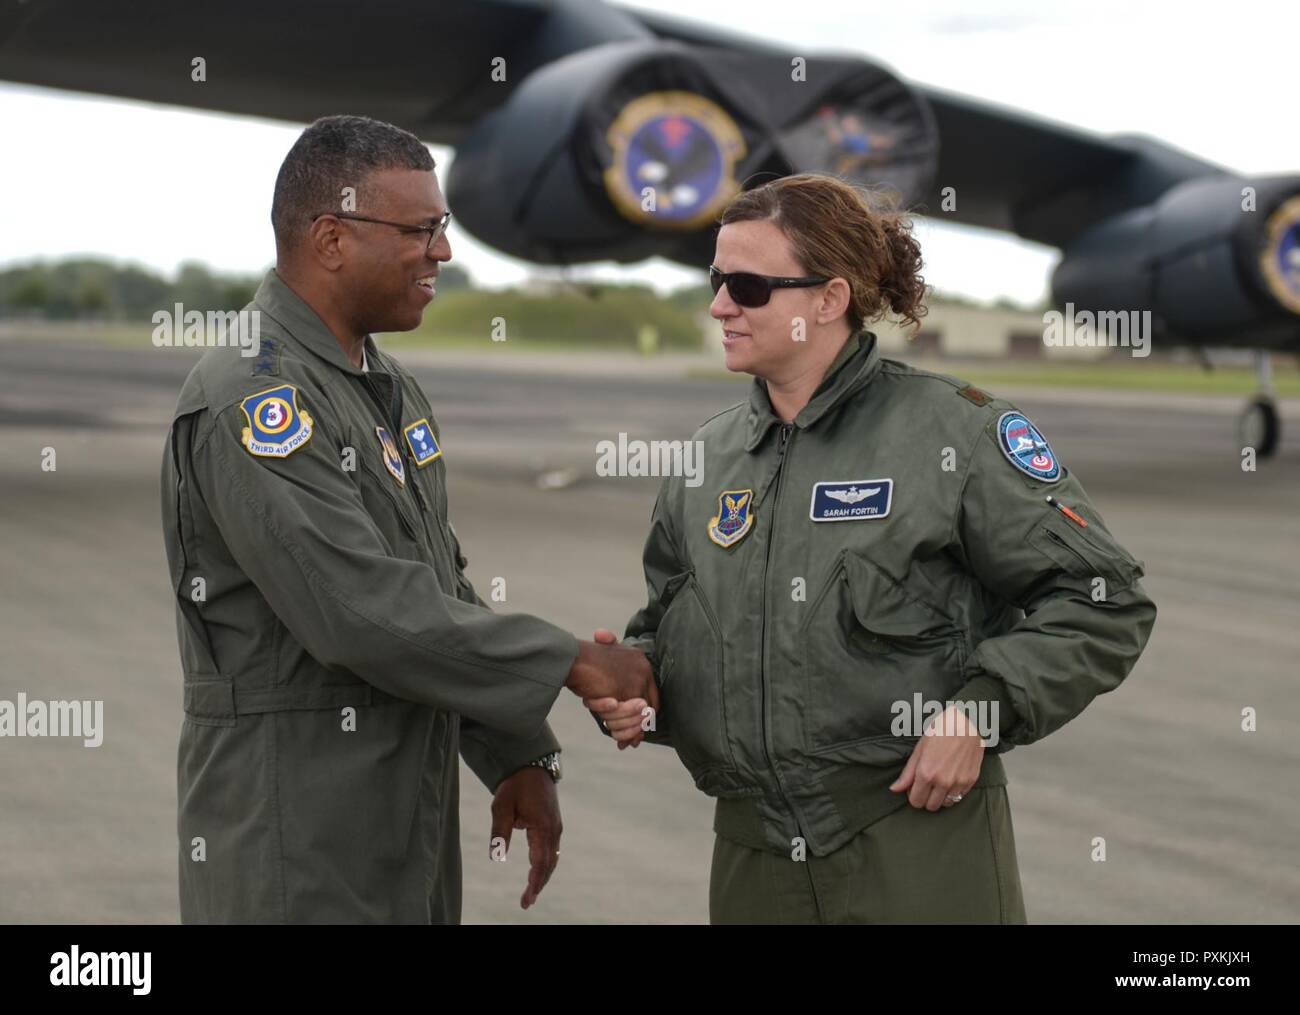 Lt. Gen. Richard Clark, 3rd Air Force commander, shakes the hand of an Air Force Global Strike Command Airman deployed to RAF Fairford, June 12, 2017. The simultaneous deployment of the B-1B Lancer, the B-2 Spirit and the B-52H Stratofortress marked the first time in history that all three strategic bomber aircraft were present in the European Theater. The aircraft were accompanied by approximately 800 Airmen as part of bomber assurance and deterrence operations. Stock Photo